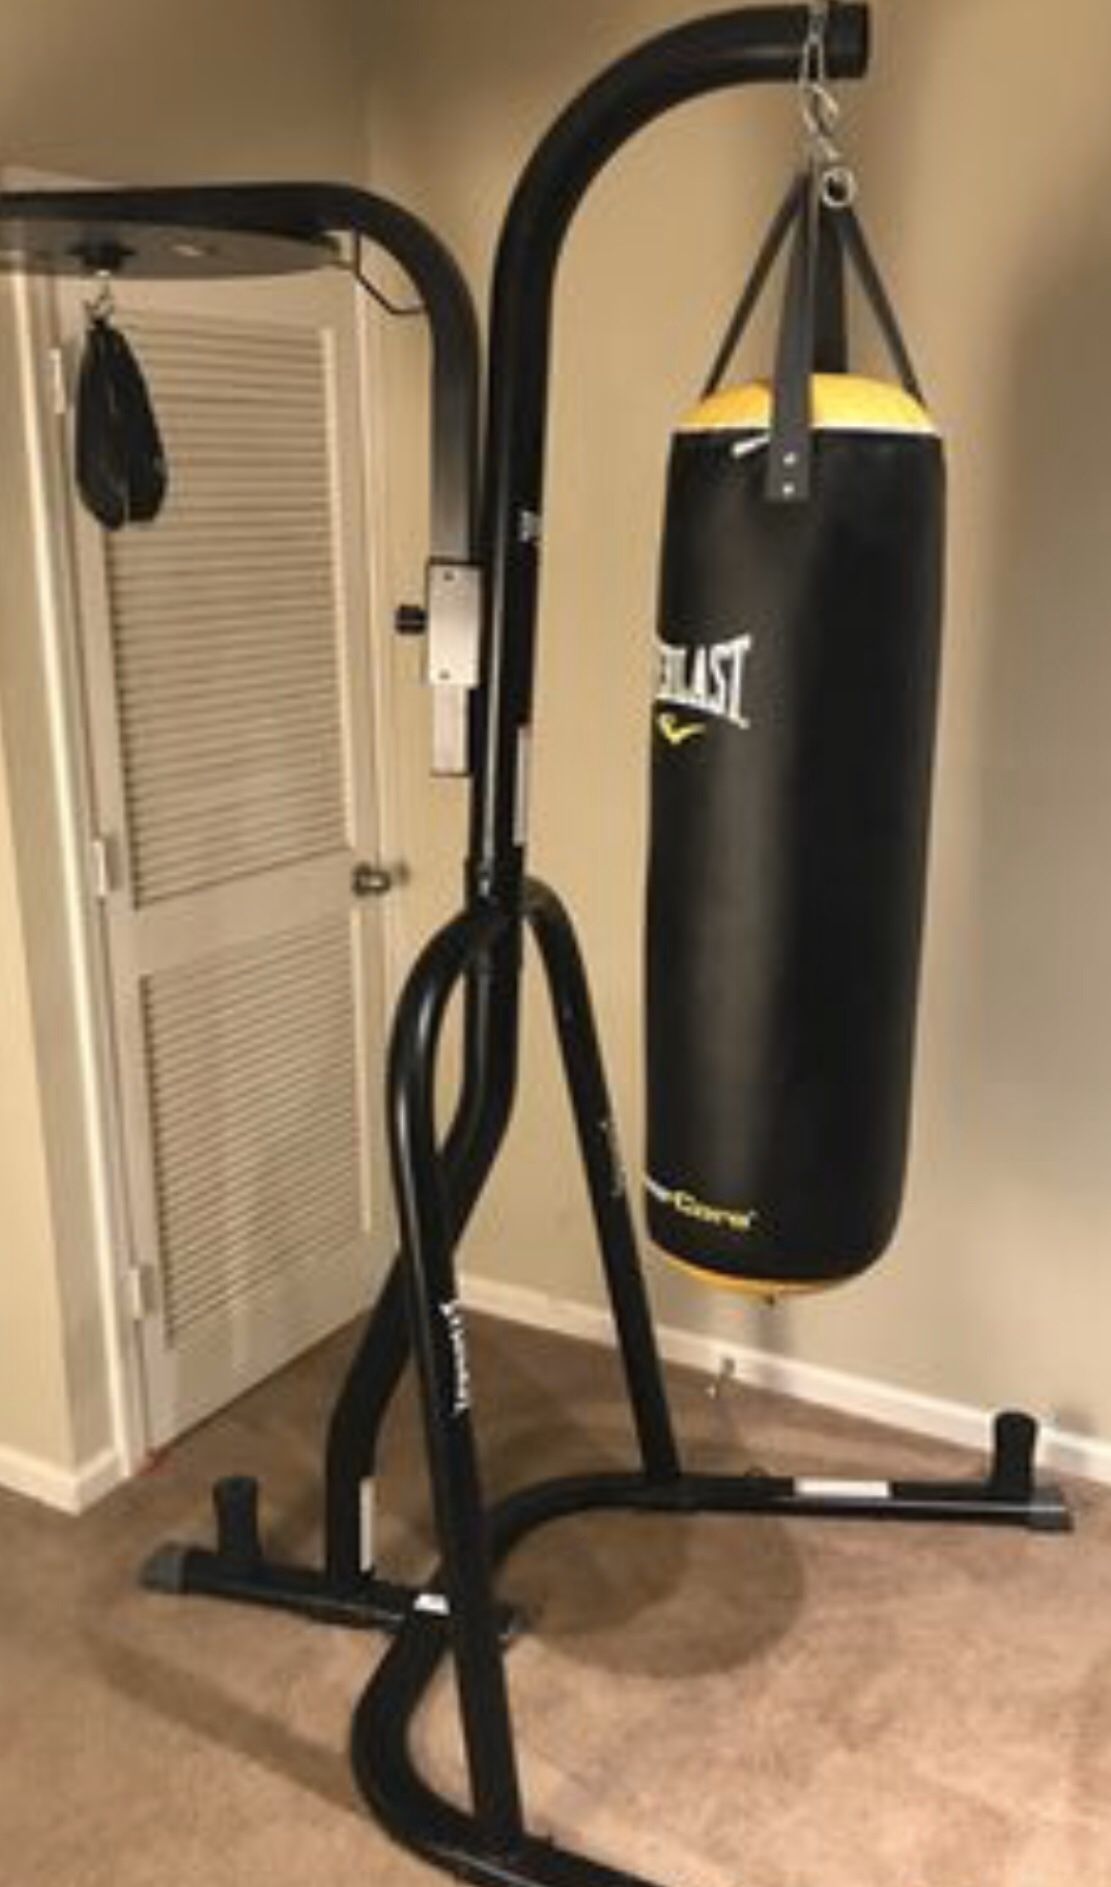 Everlast punching bag stand